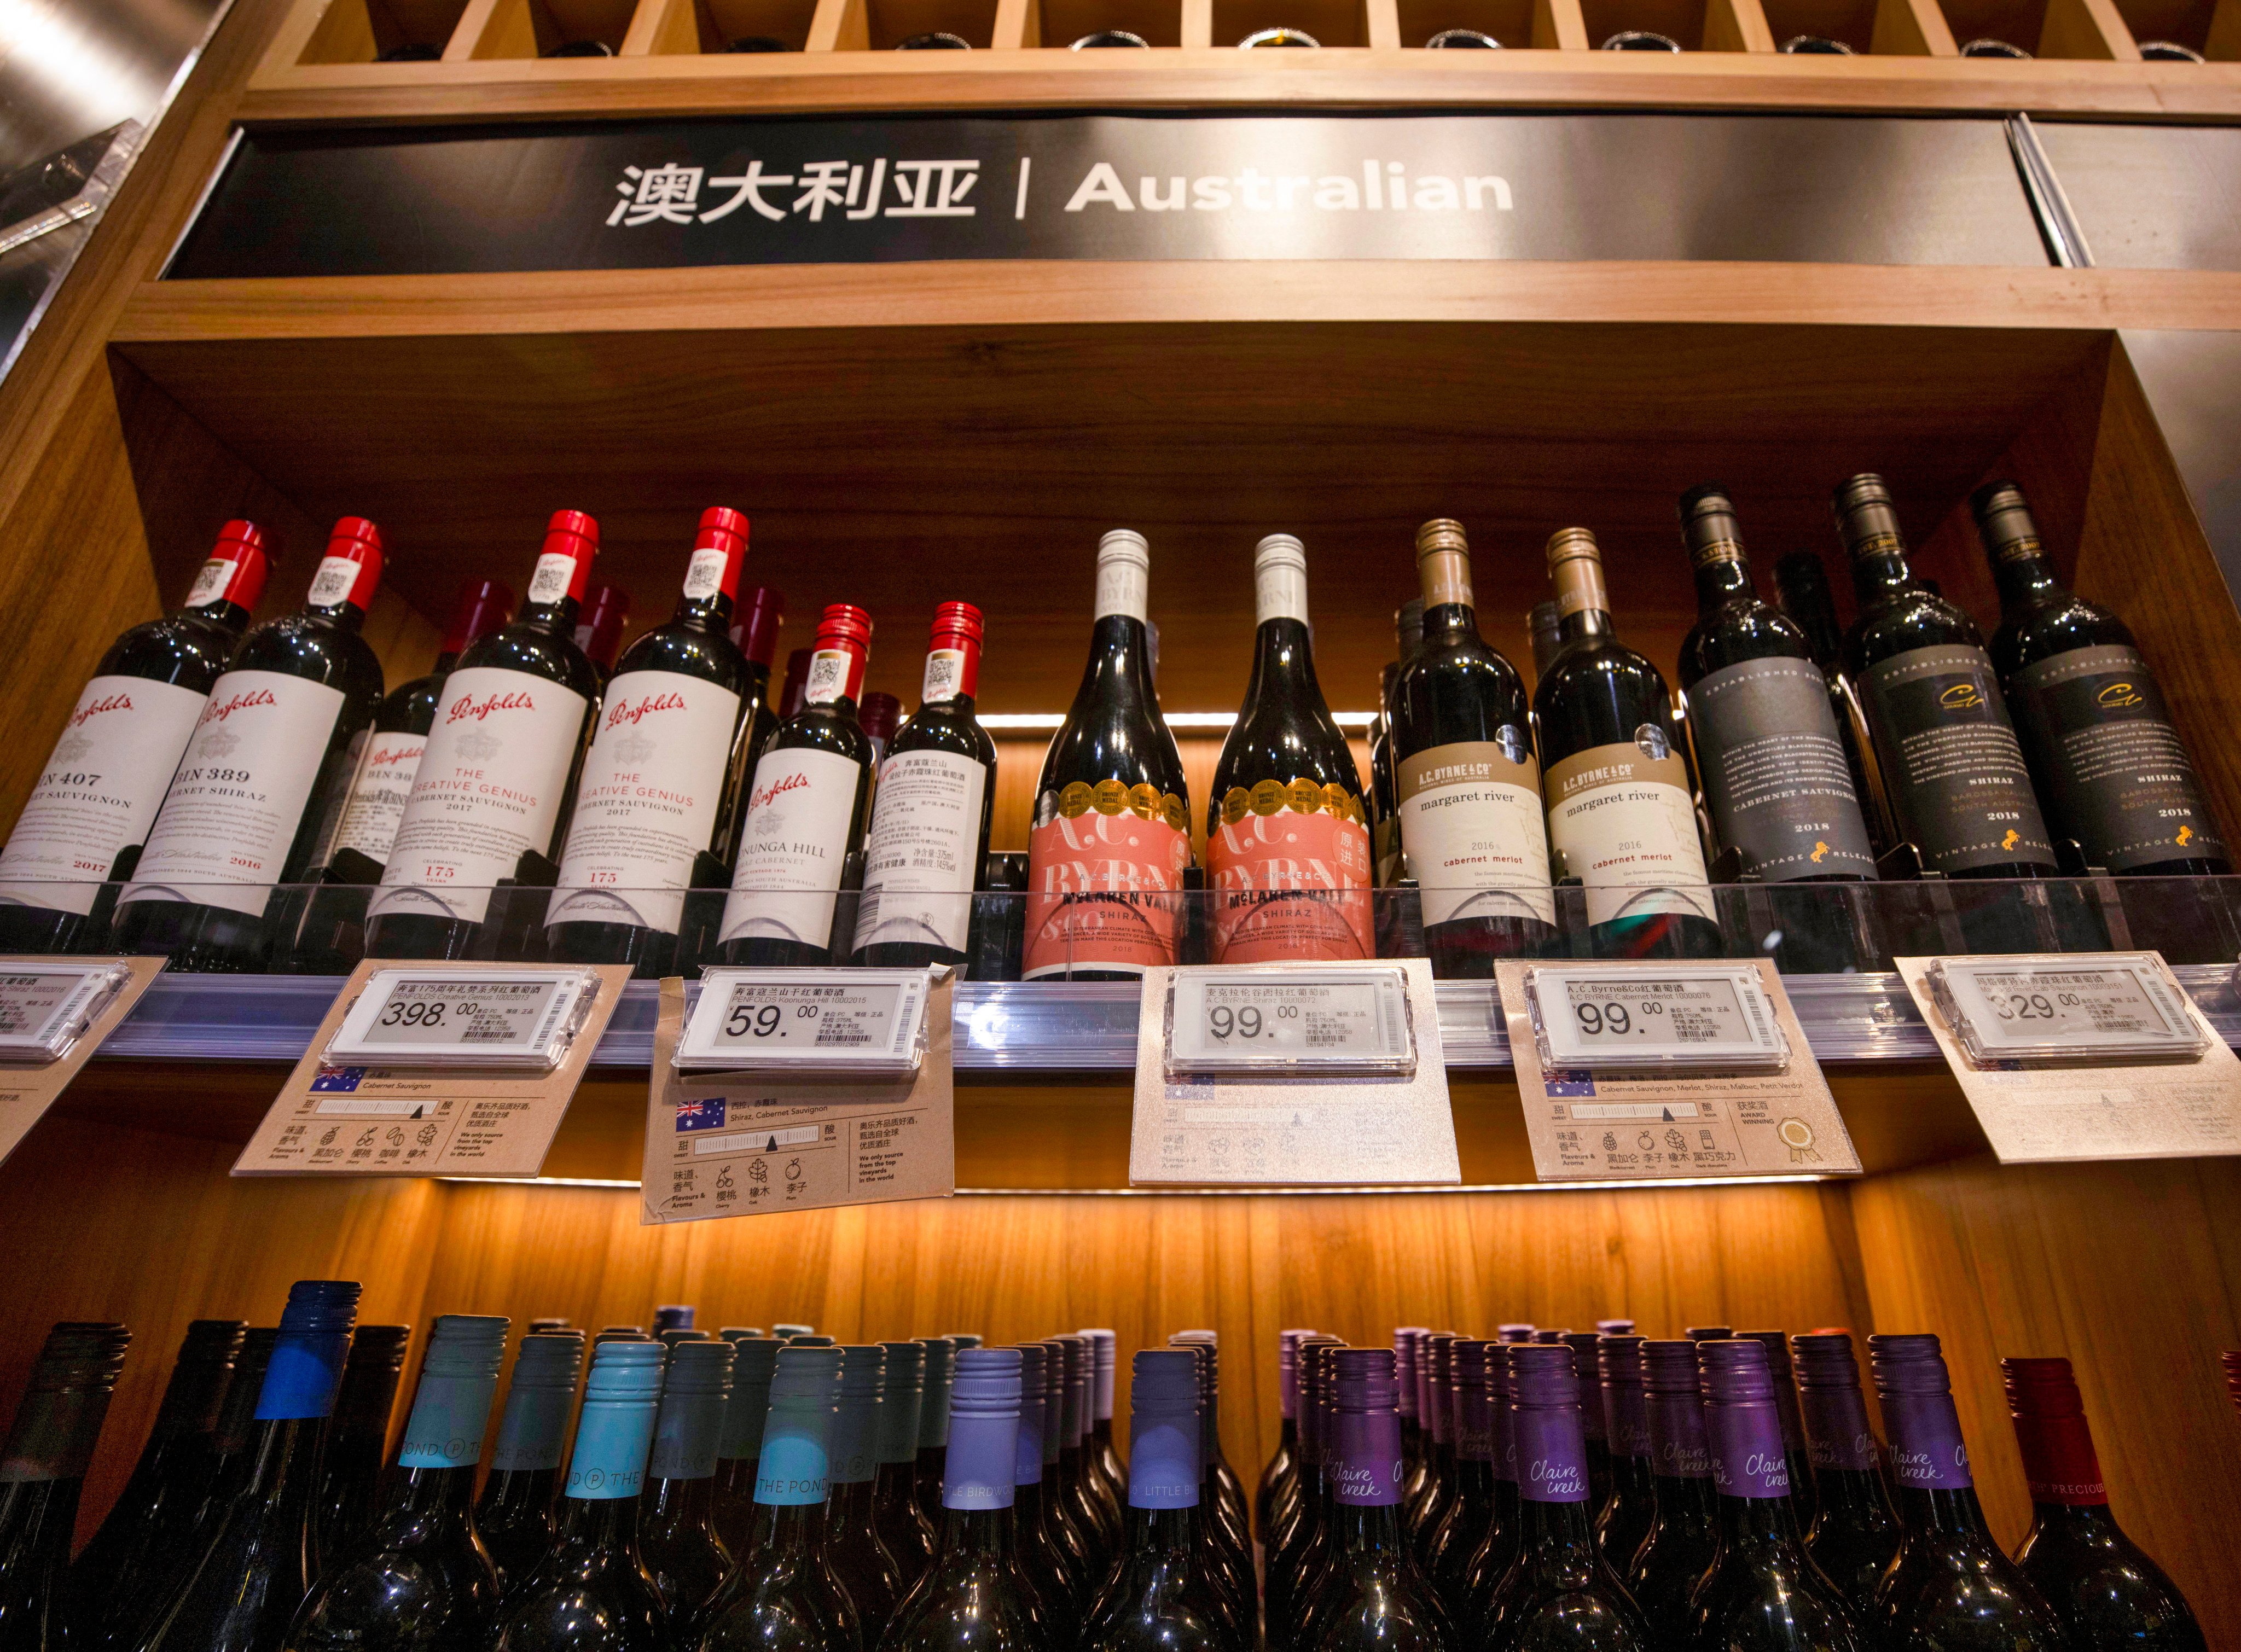 China last month lifted its punitive tariffs on Australia’s wine exports, signaling an end to an extended campaign of trade pressure on Canberra and raising hopes for a revival of the industry. Photo: EPA-EFE